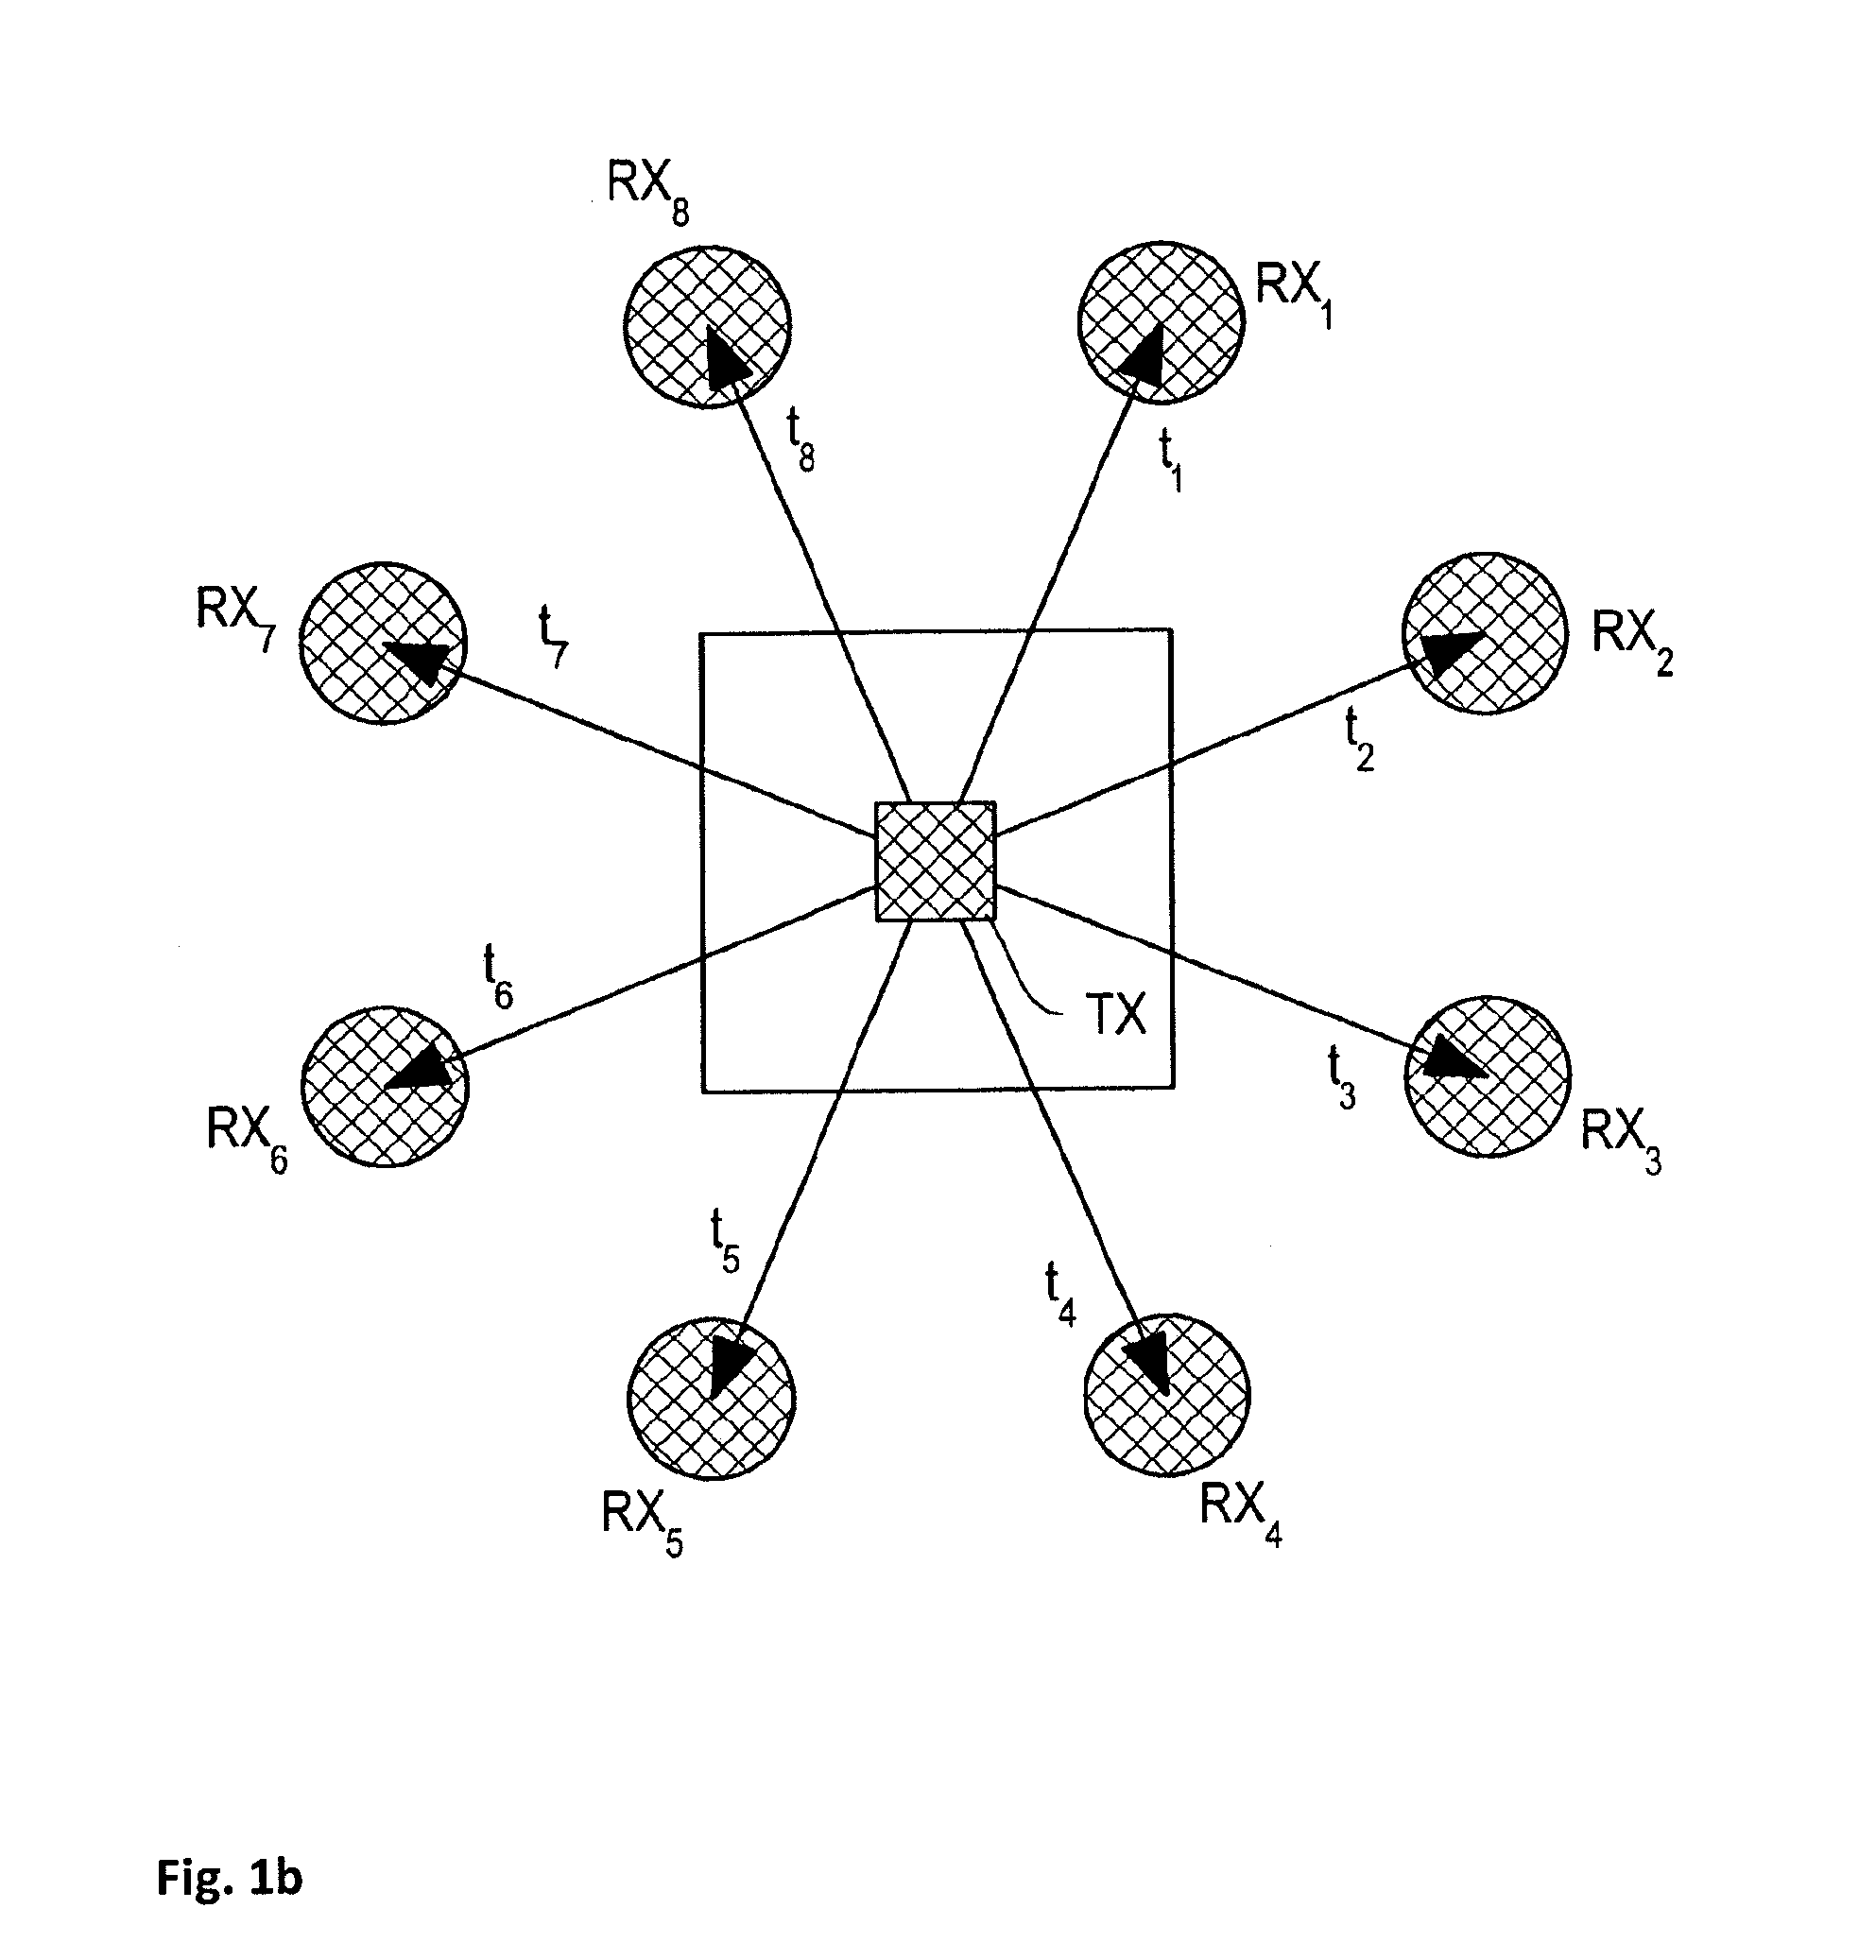 Enhanced RF location methods and systems